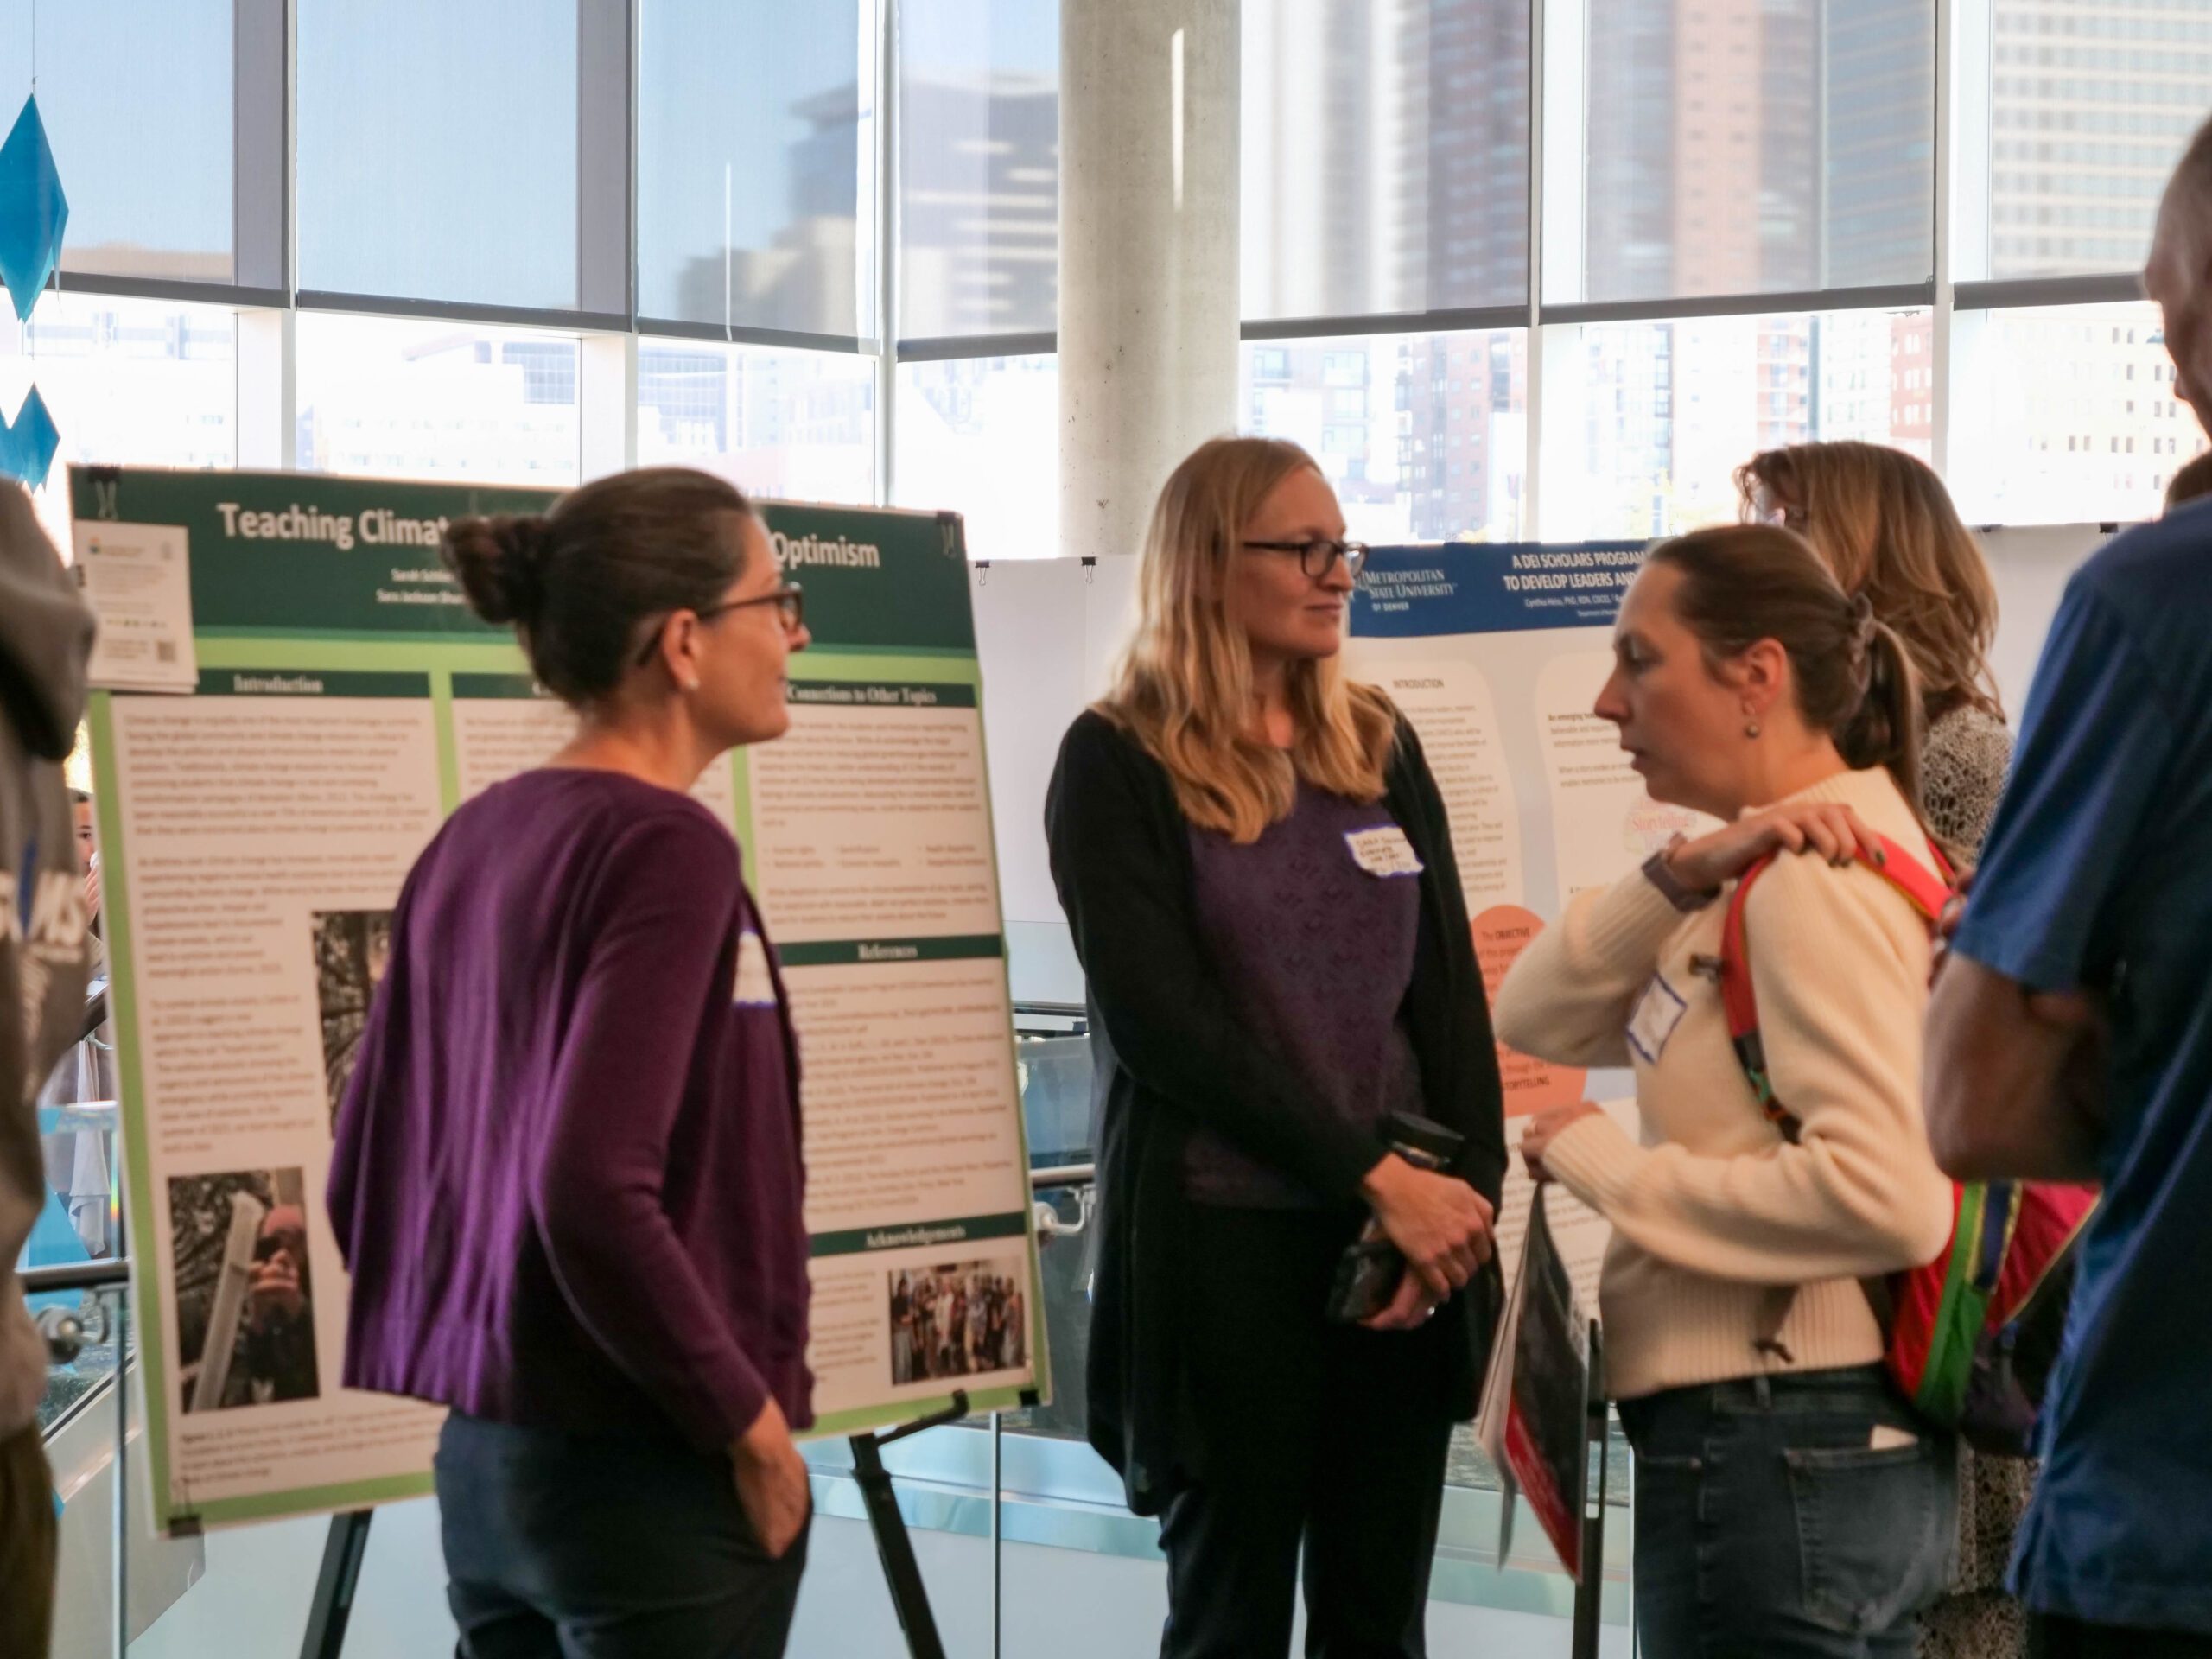 Faculty and staff discussing research projects at the SoTL poster session